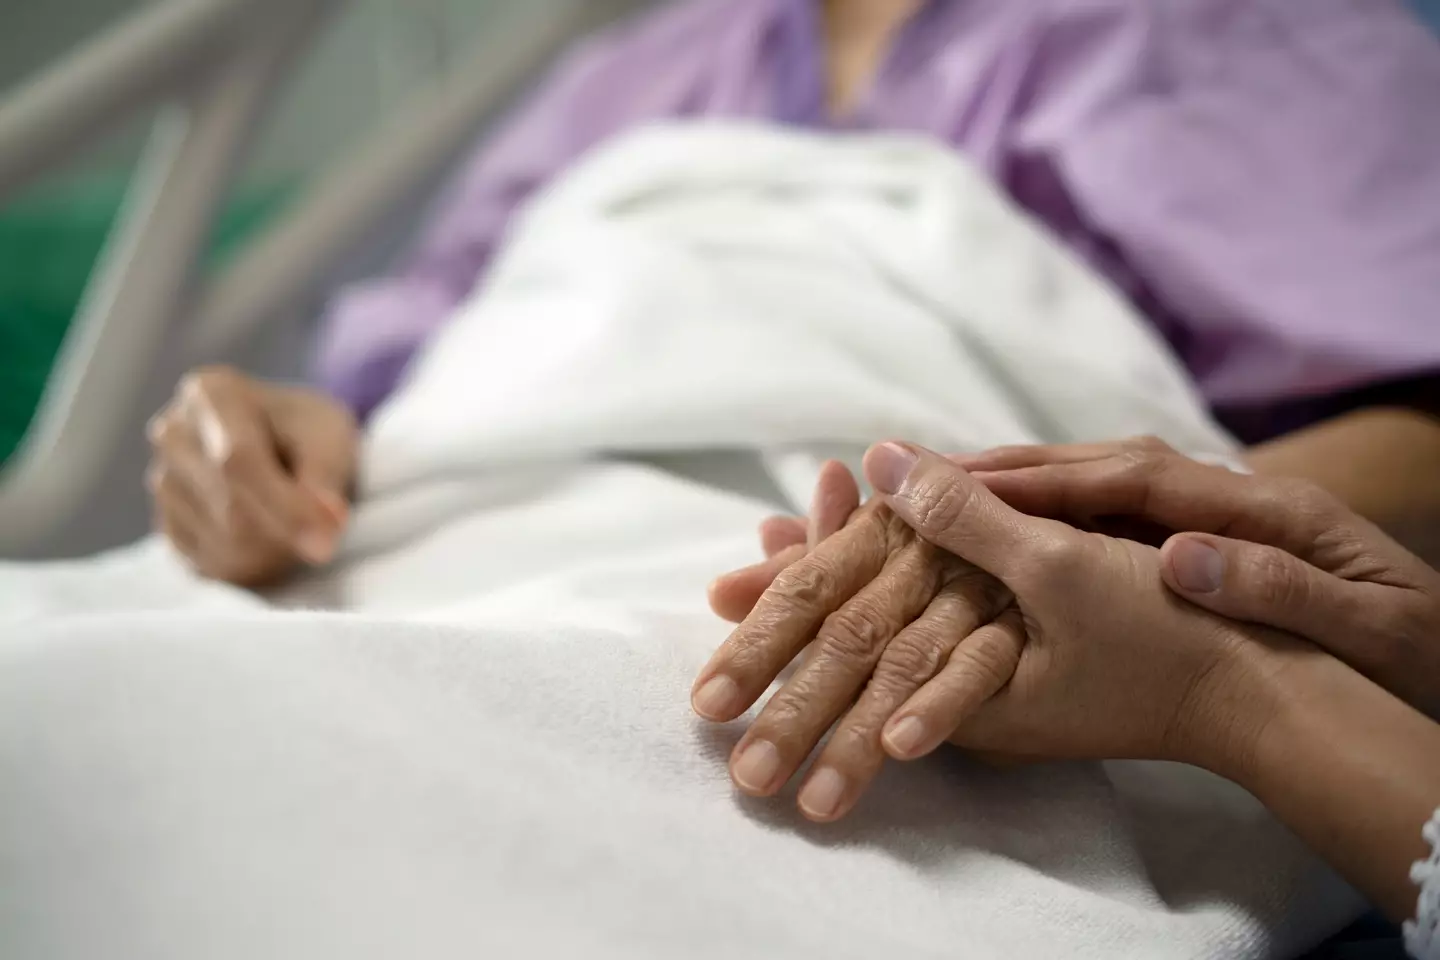 The end-of-life carer gave an emotional insight into her job.